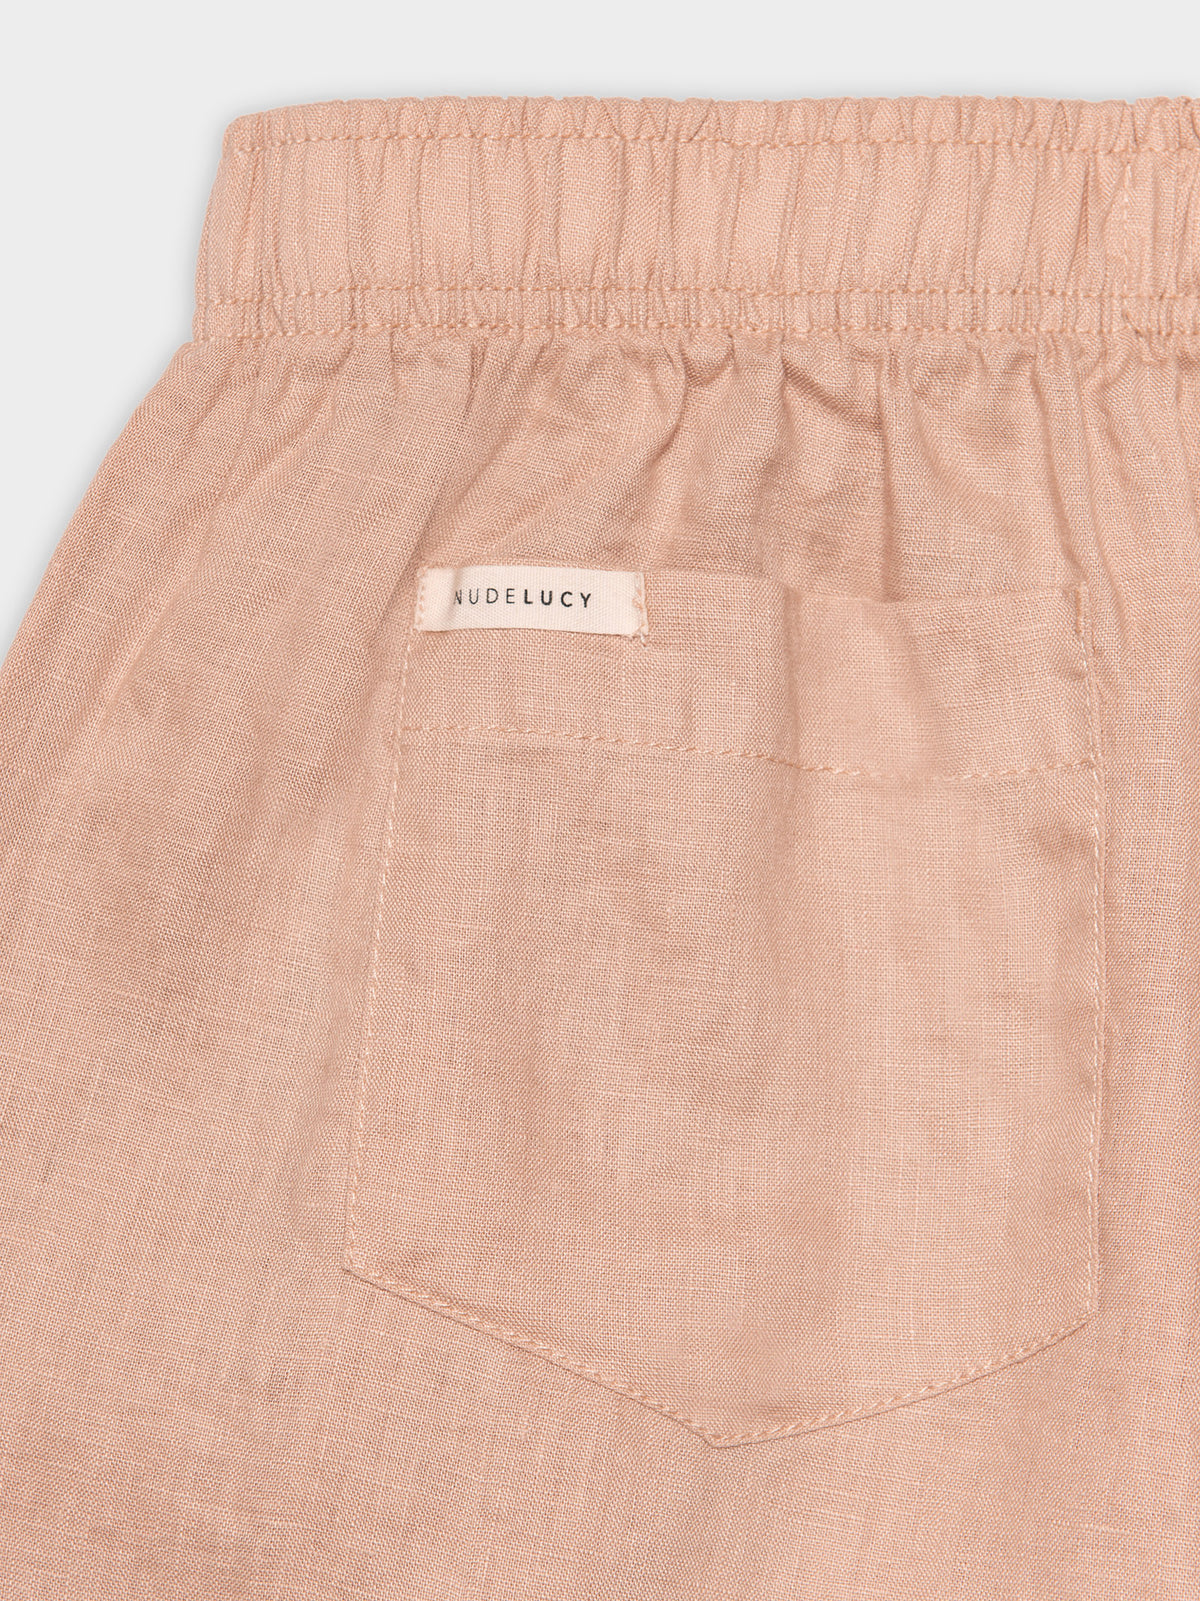 Nude Linen Lounge Crop Pant in Clay Pink